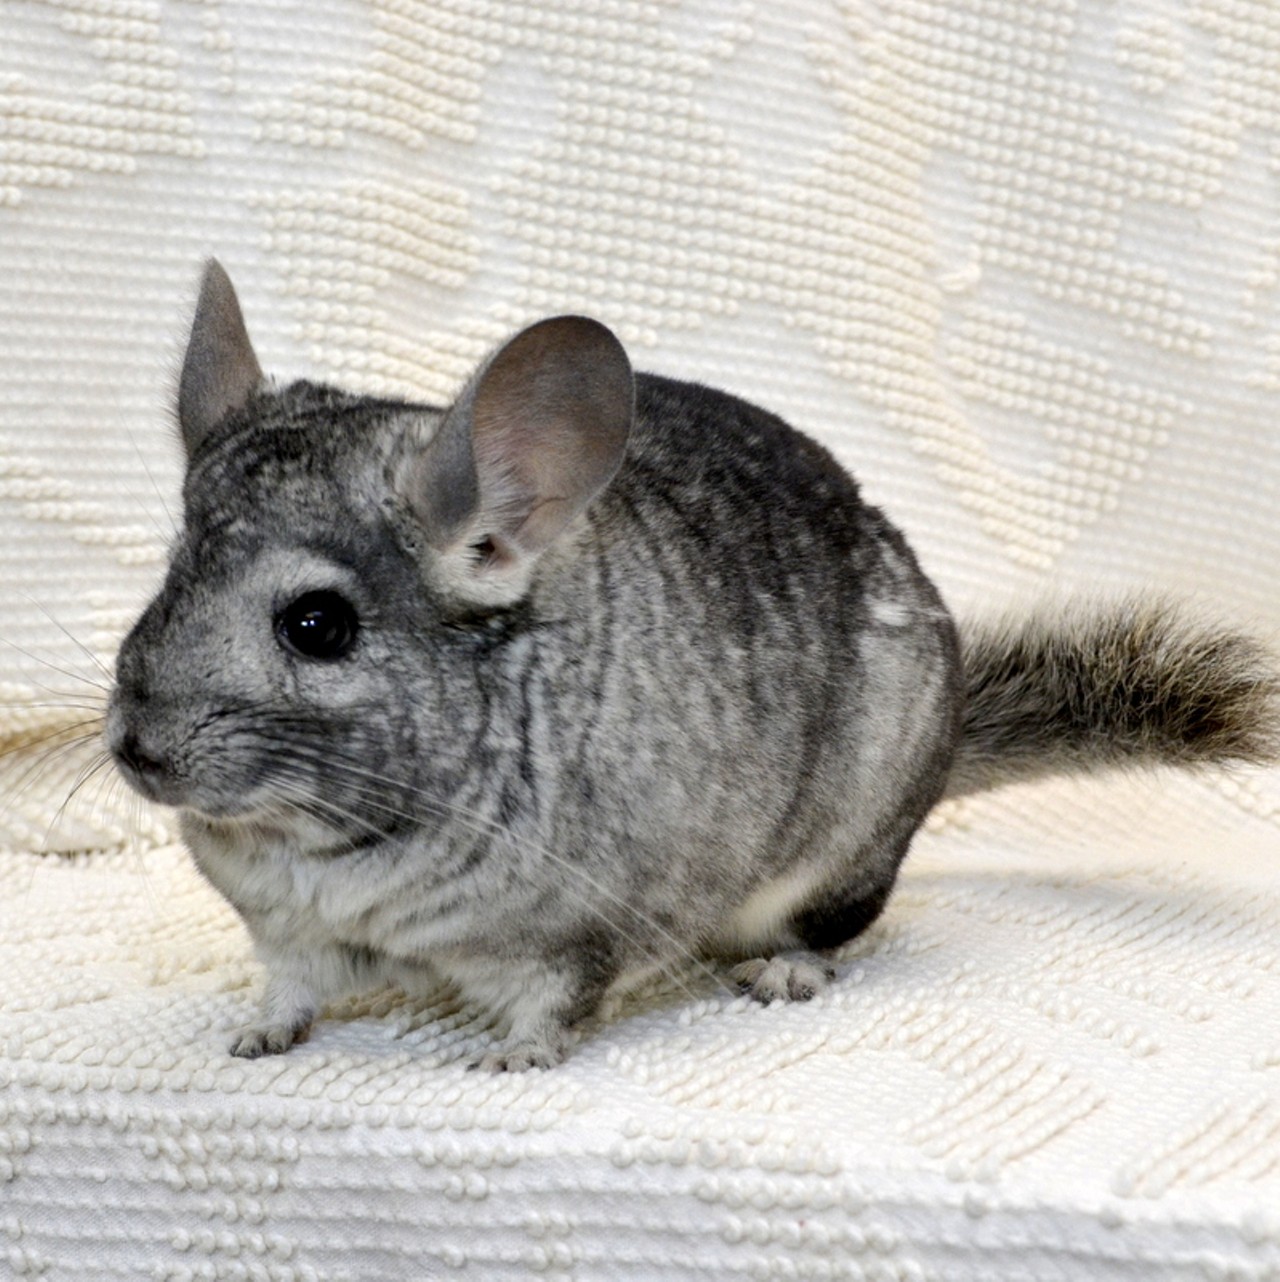 NAME: Chip
GENDER: Male
BREED: Chinchilla
AGE: 1 year
WEIGHT: 
SPECIAL CONSIDERATIONS: Prefers older children onlyv
REASON I CAME TO MHS: Owner surrender
LOCATION: Berman Center for Animal Care in Westland
ID NUMBER: 864927